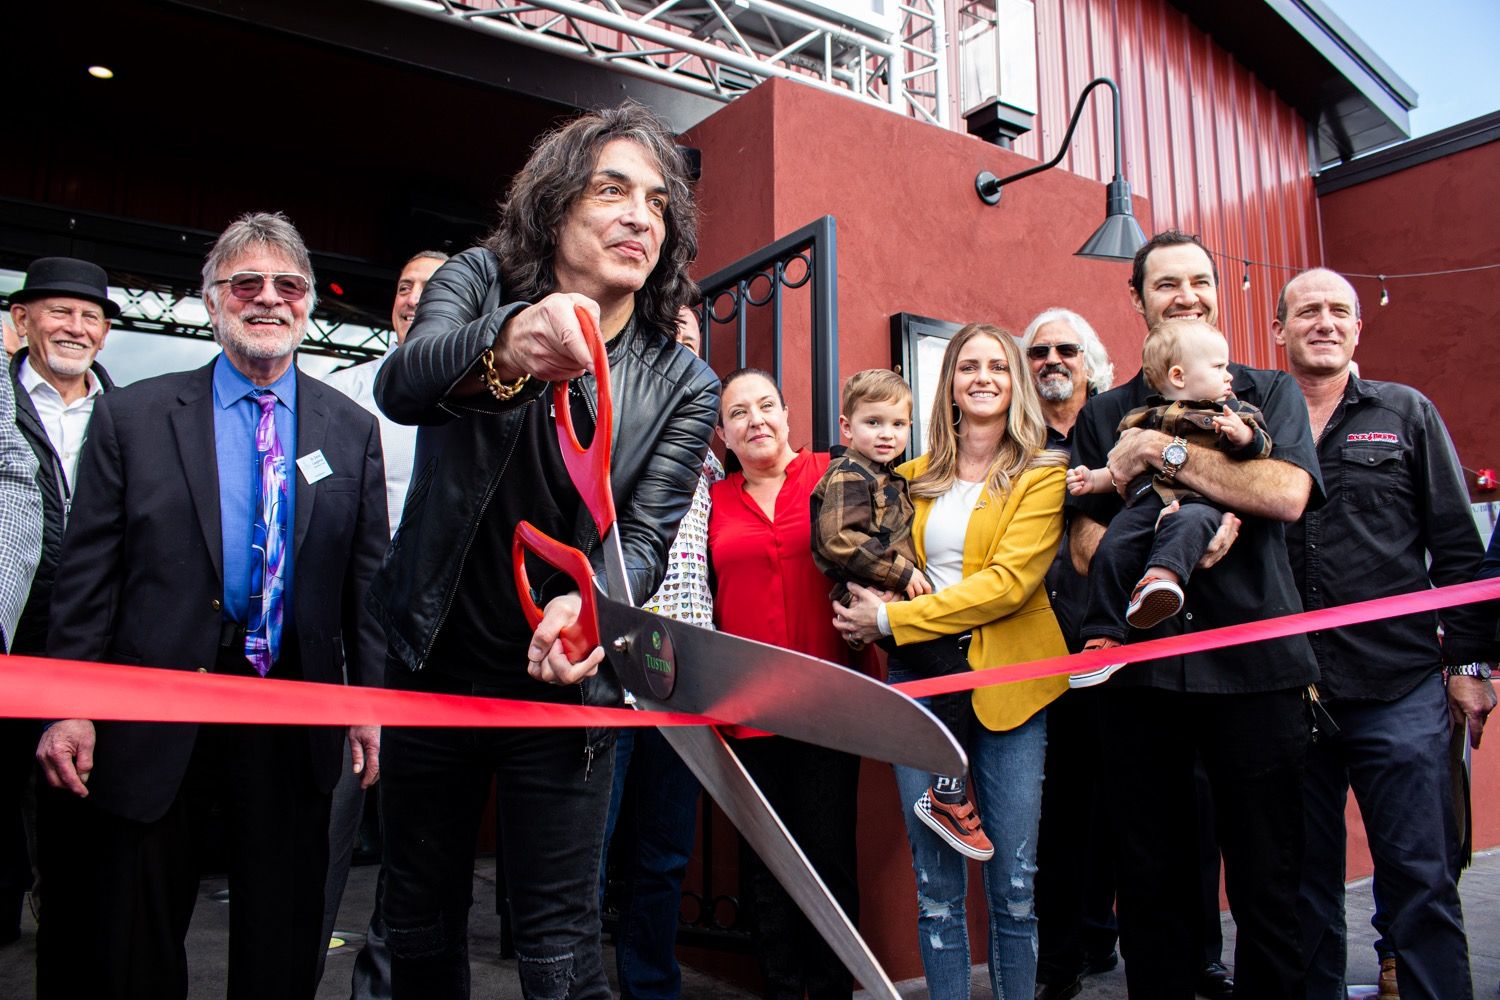 Rock & Brews Tustin Celebrates Grand Opening with Paul Stanley